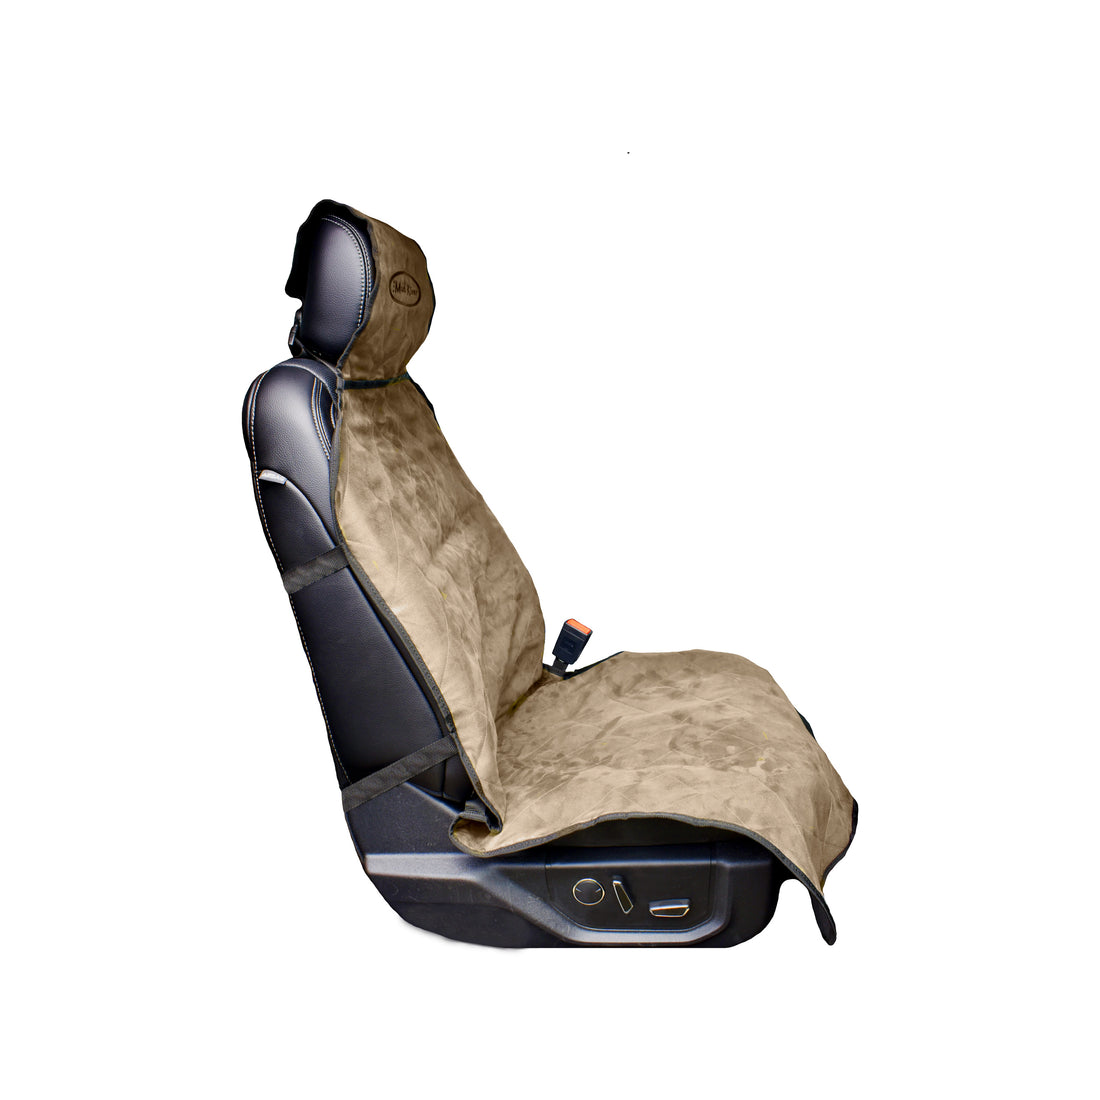 Boyt - Mud River Fitted Shotgun Seat Cover (New Material)